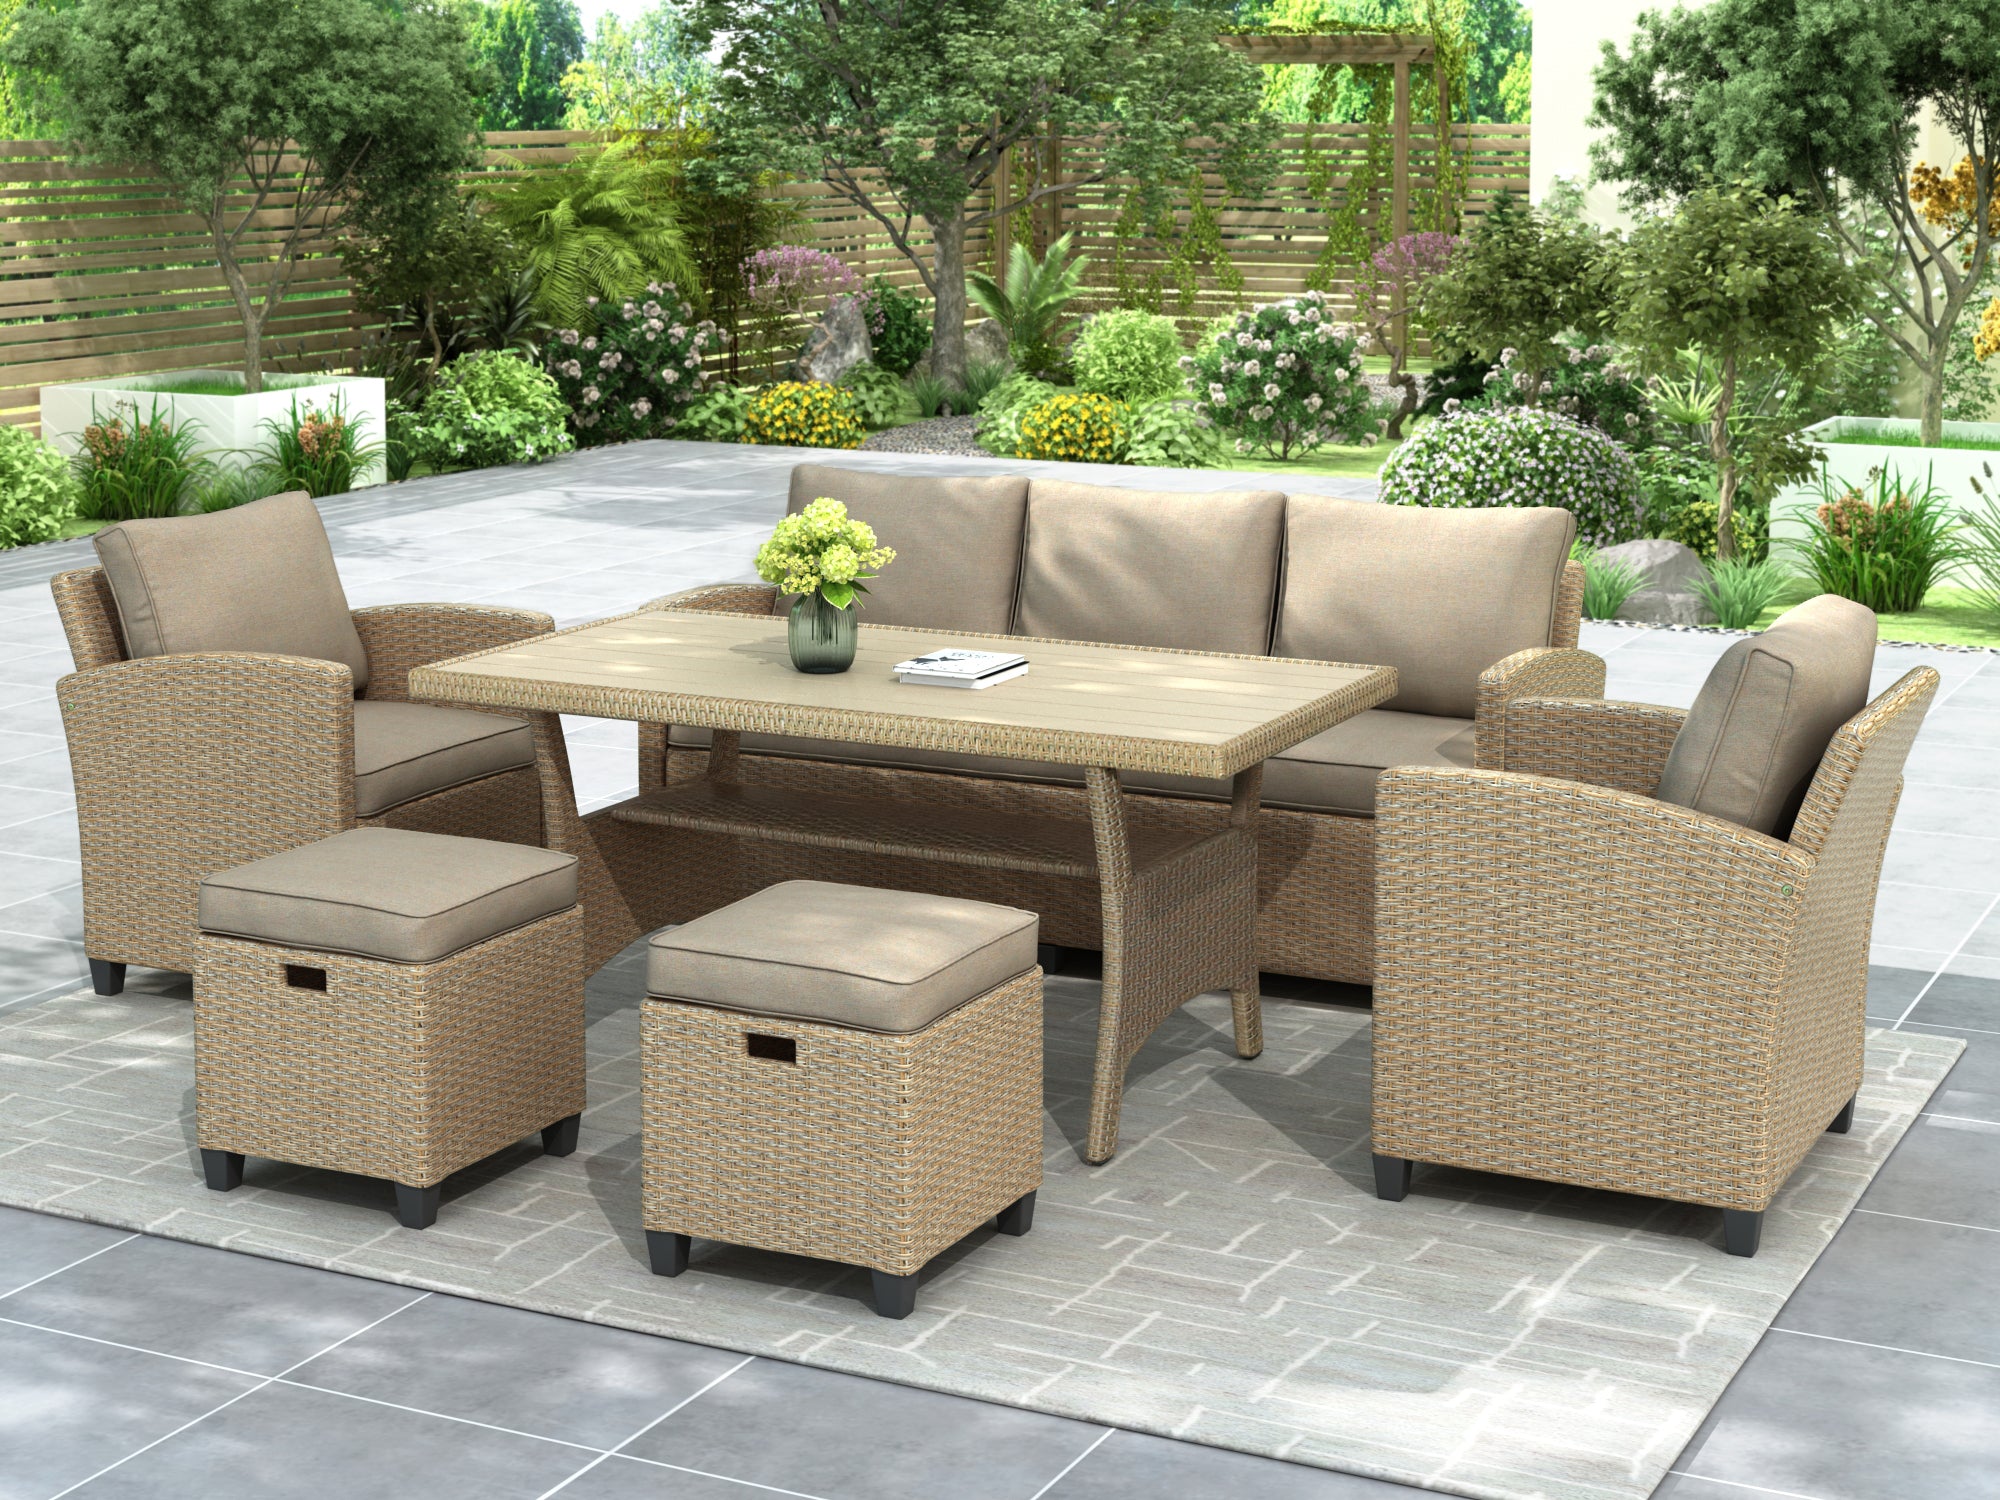 6 Piece Outdoor Rattan Dining Set with Table, Chair, Ottomans